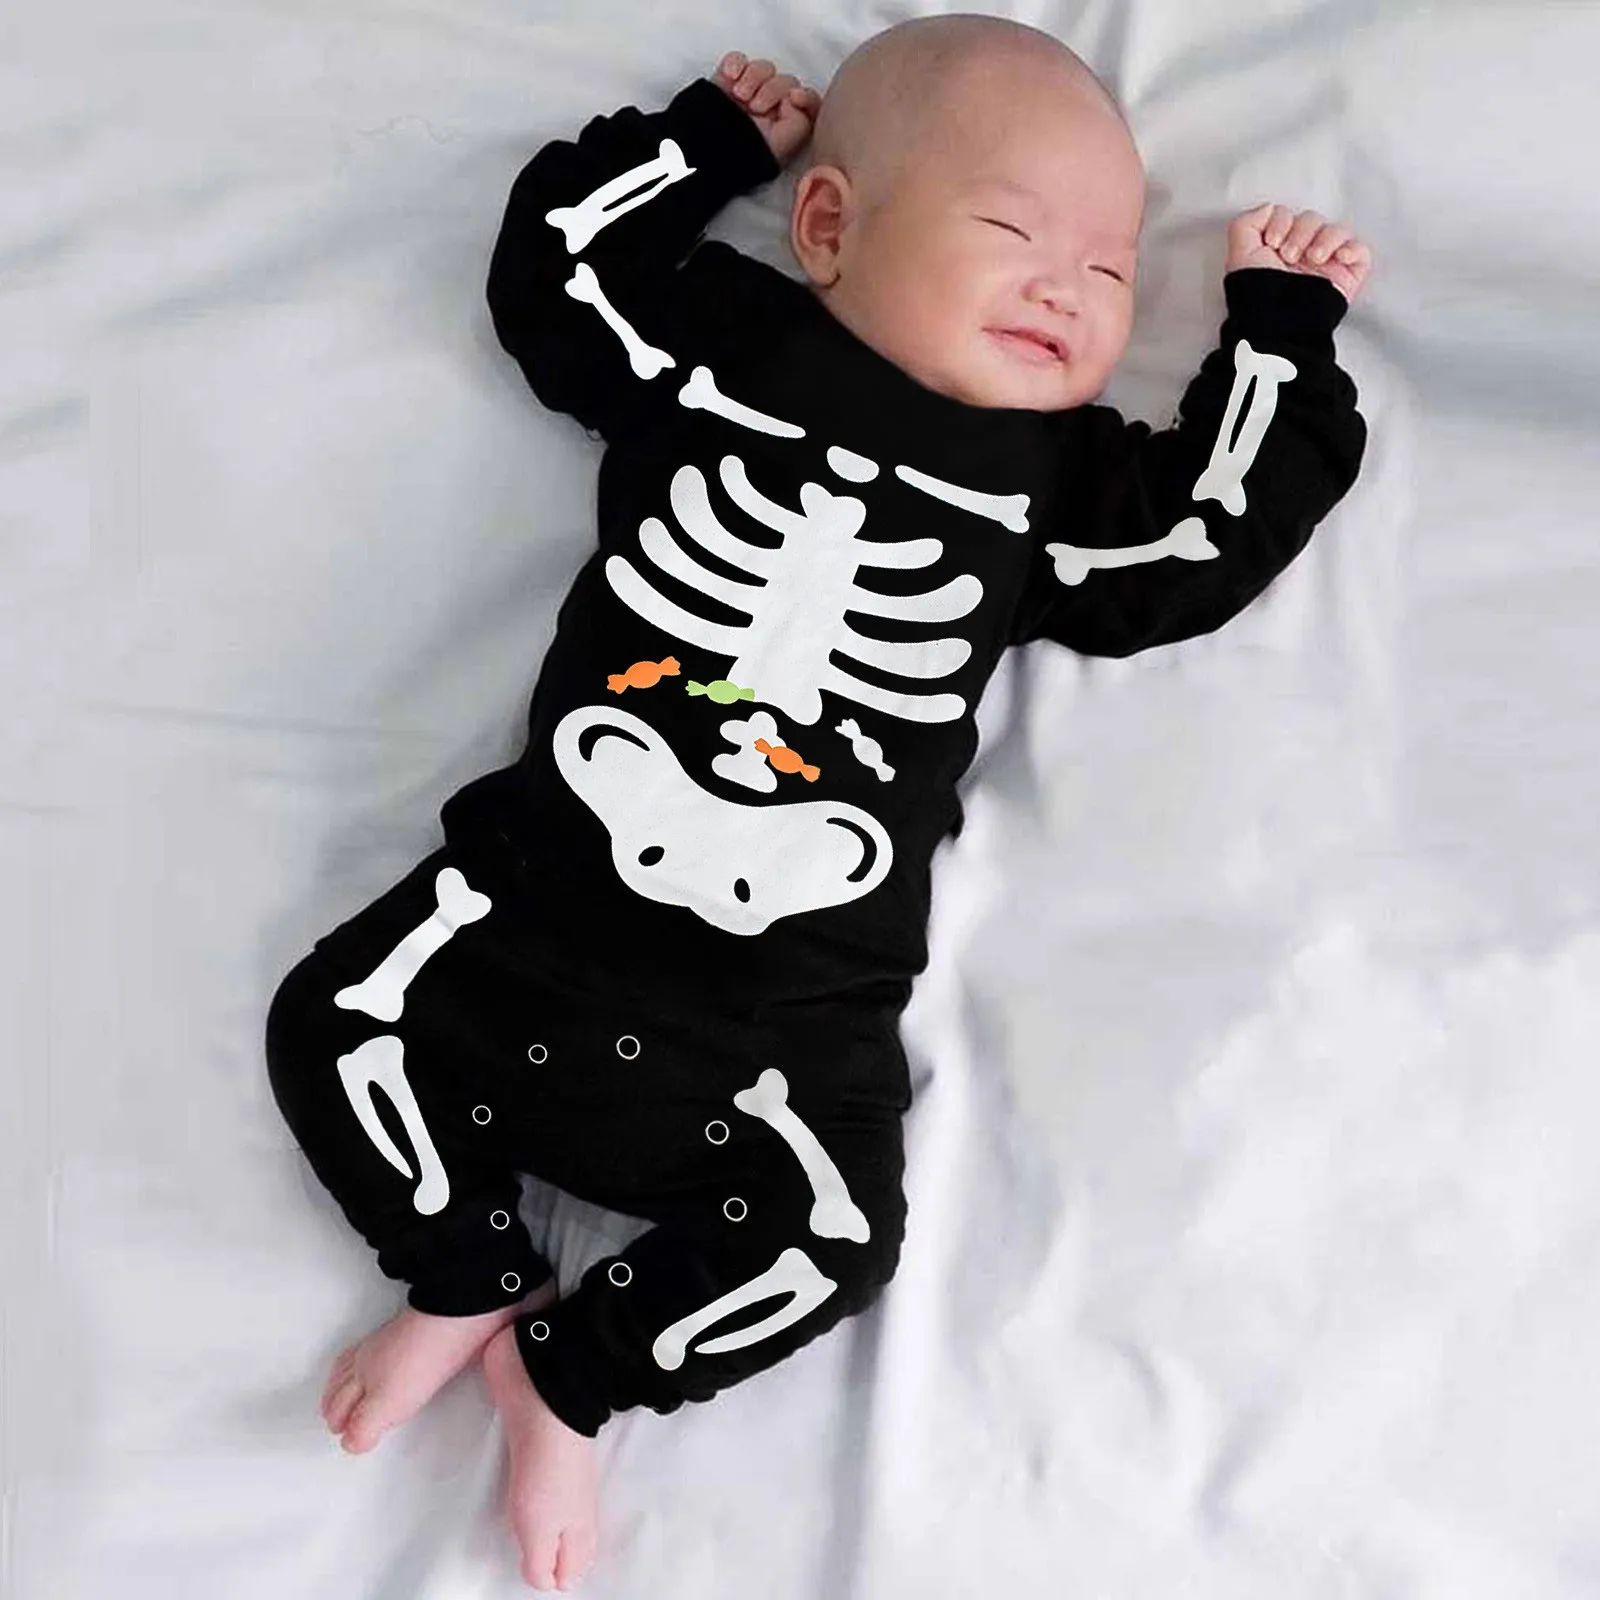 Xiaoluokaixin Newborn My First Halloween Christmas Outfits Baby Boy Girl Hooded Romper One Piece Jumpsuit Winter Clothing 